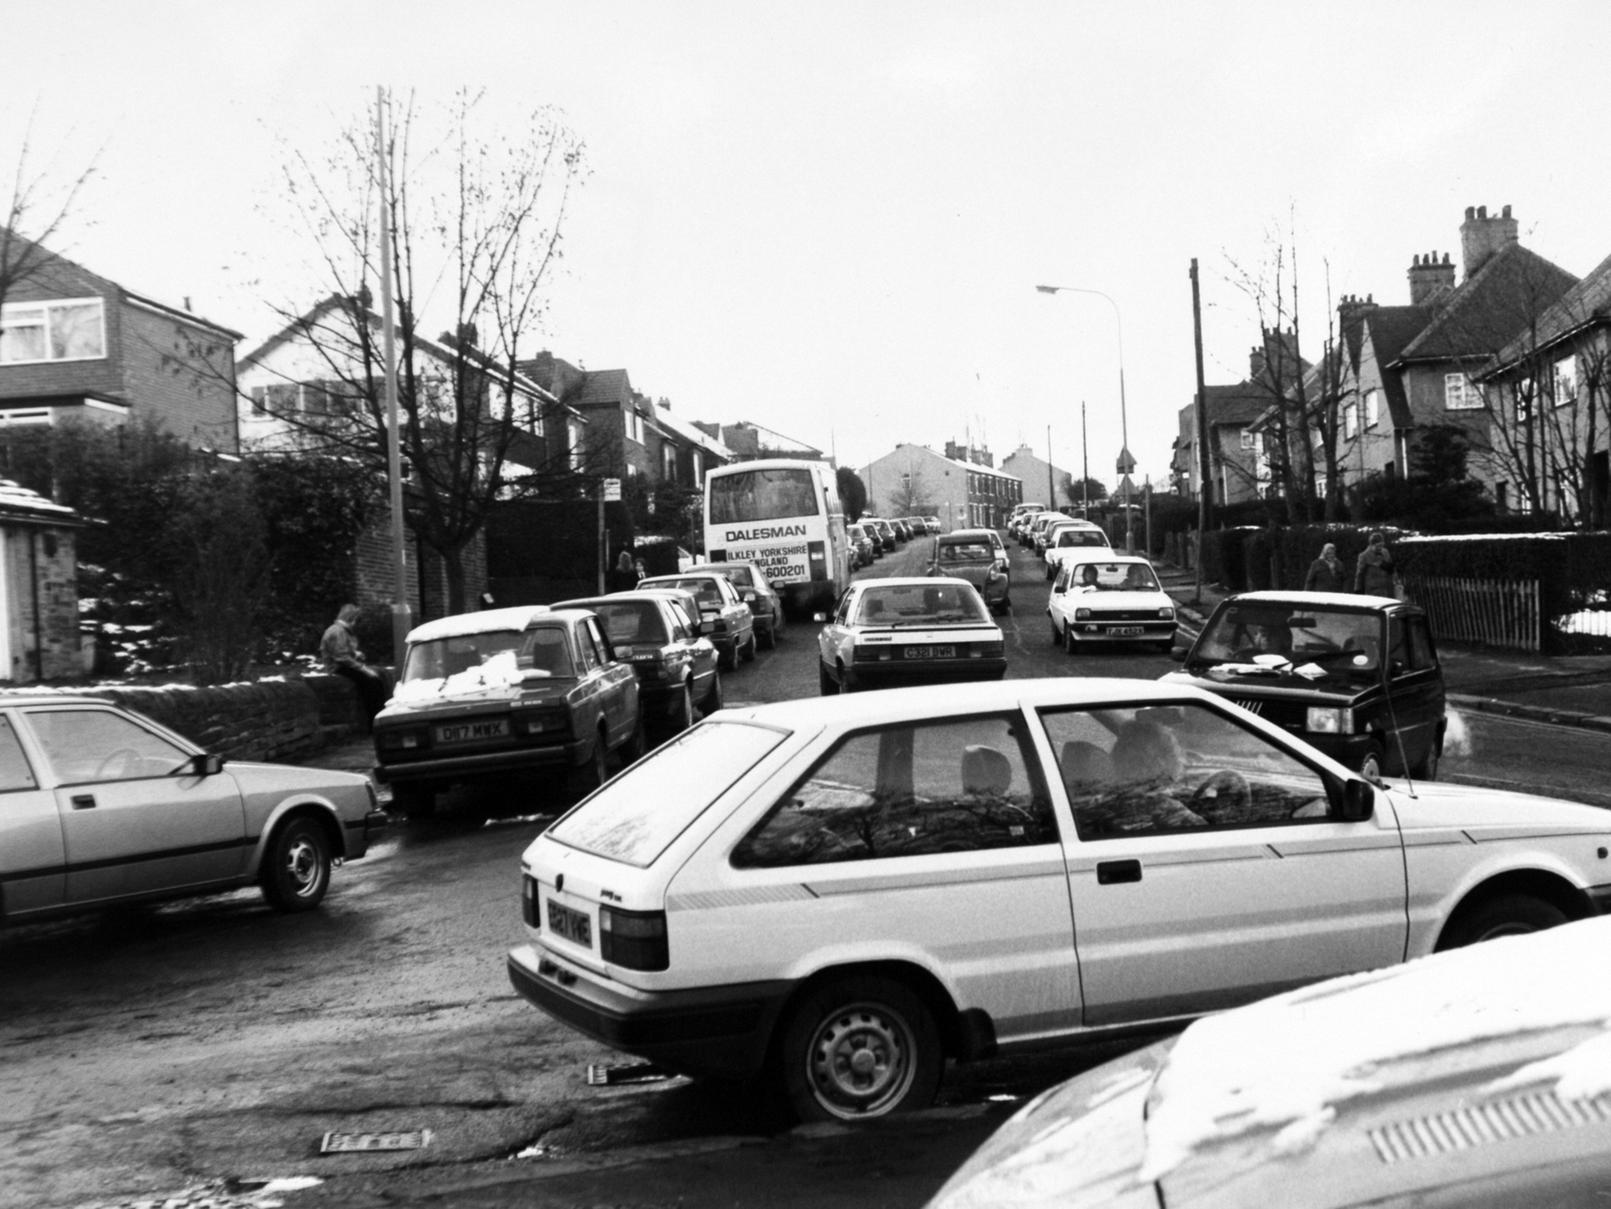 The chaotic scene in Fartown as traffic builds up and vehicles park waiting to pick up pupils from Fulneck School at the end of the school day.